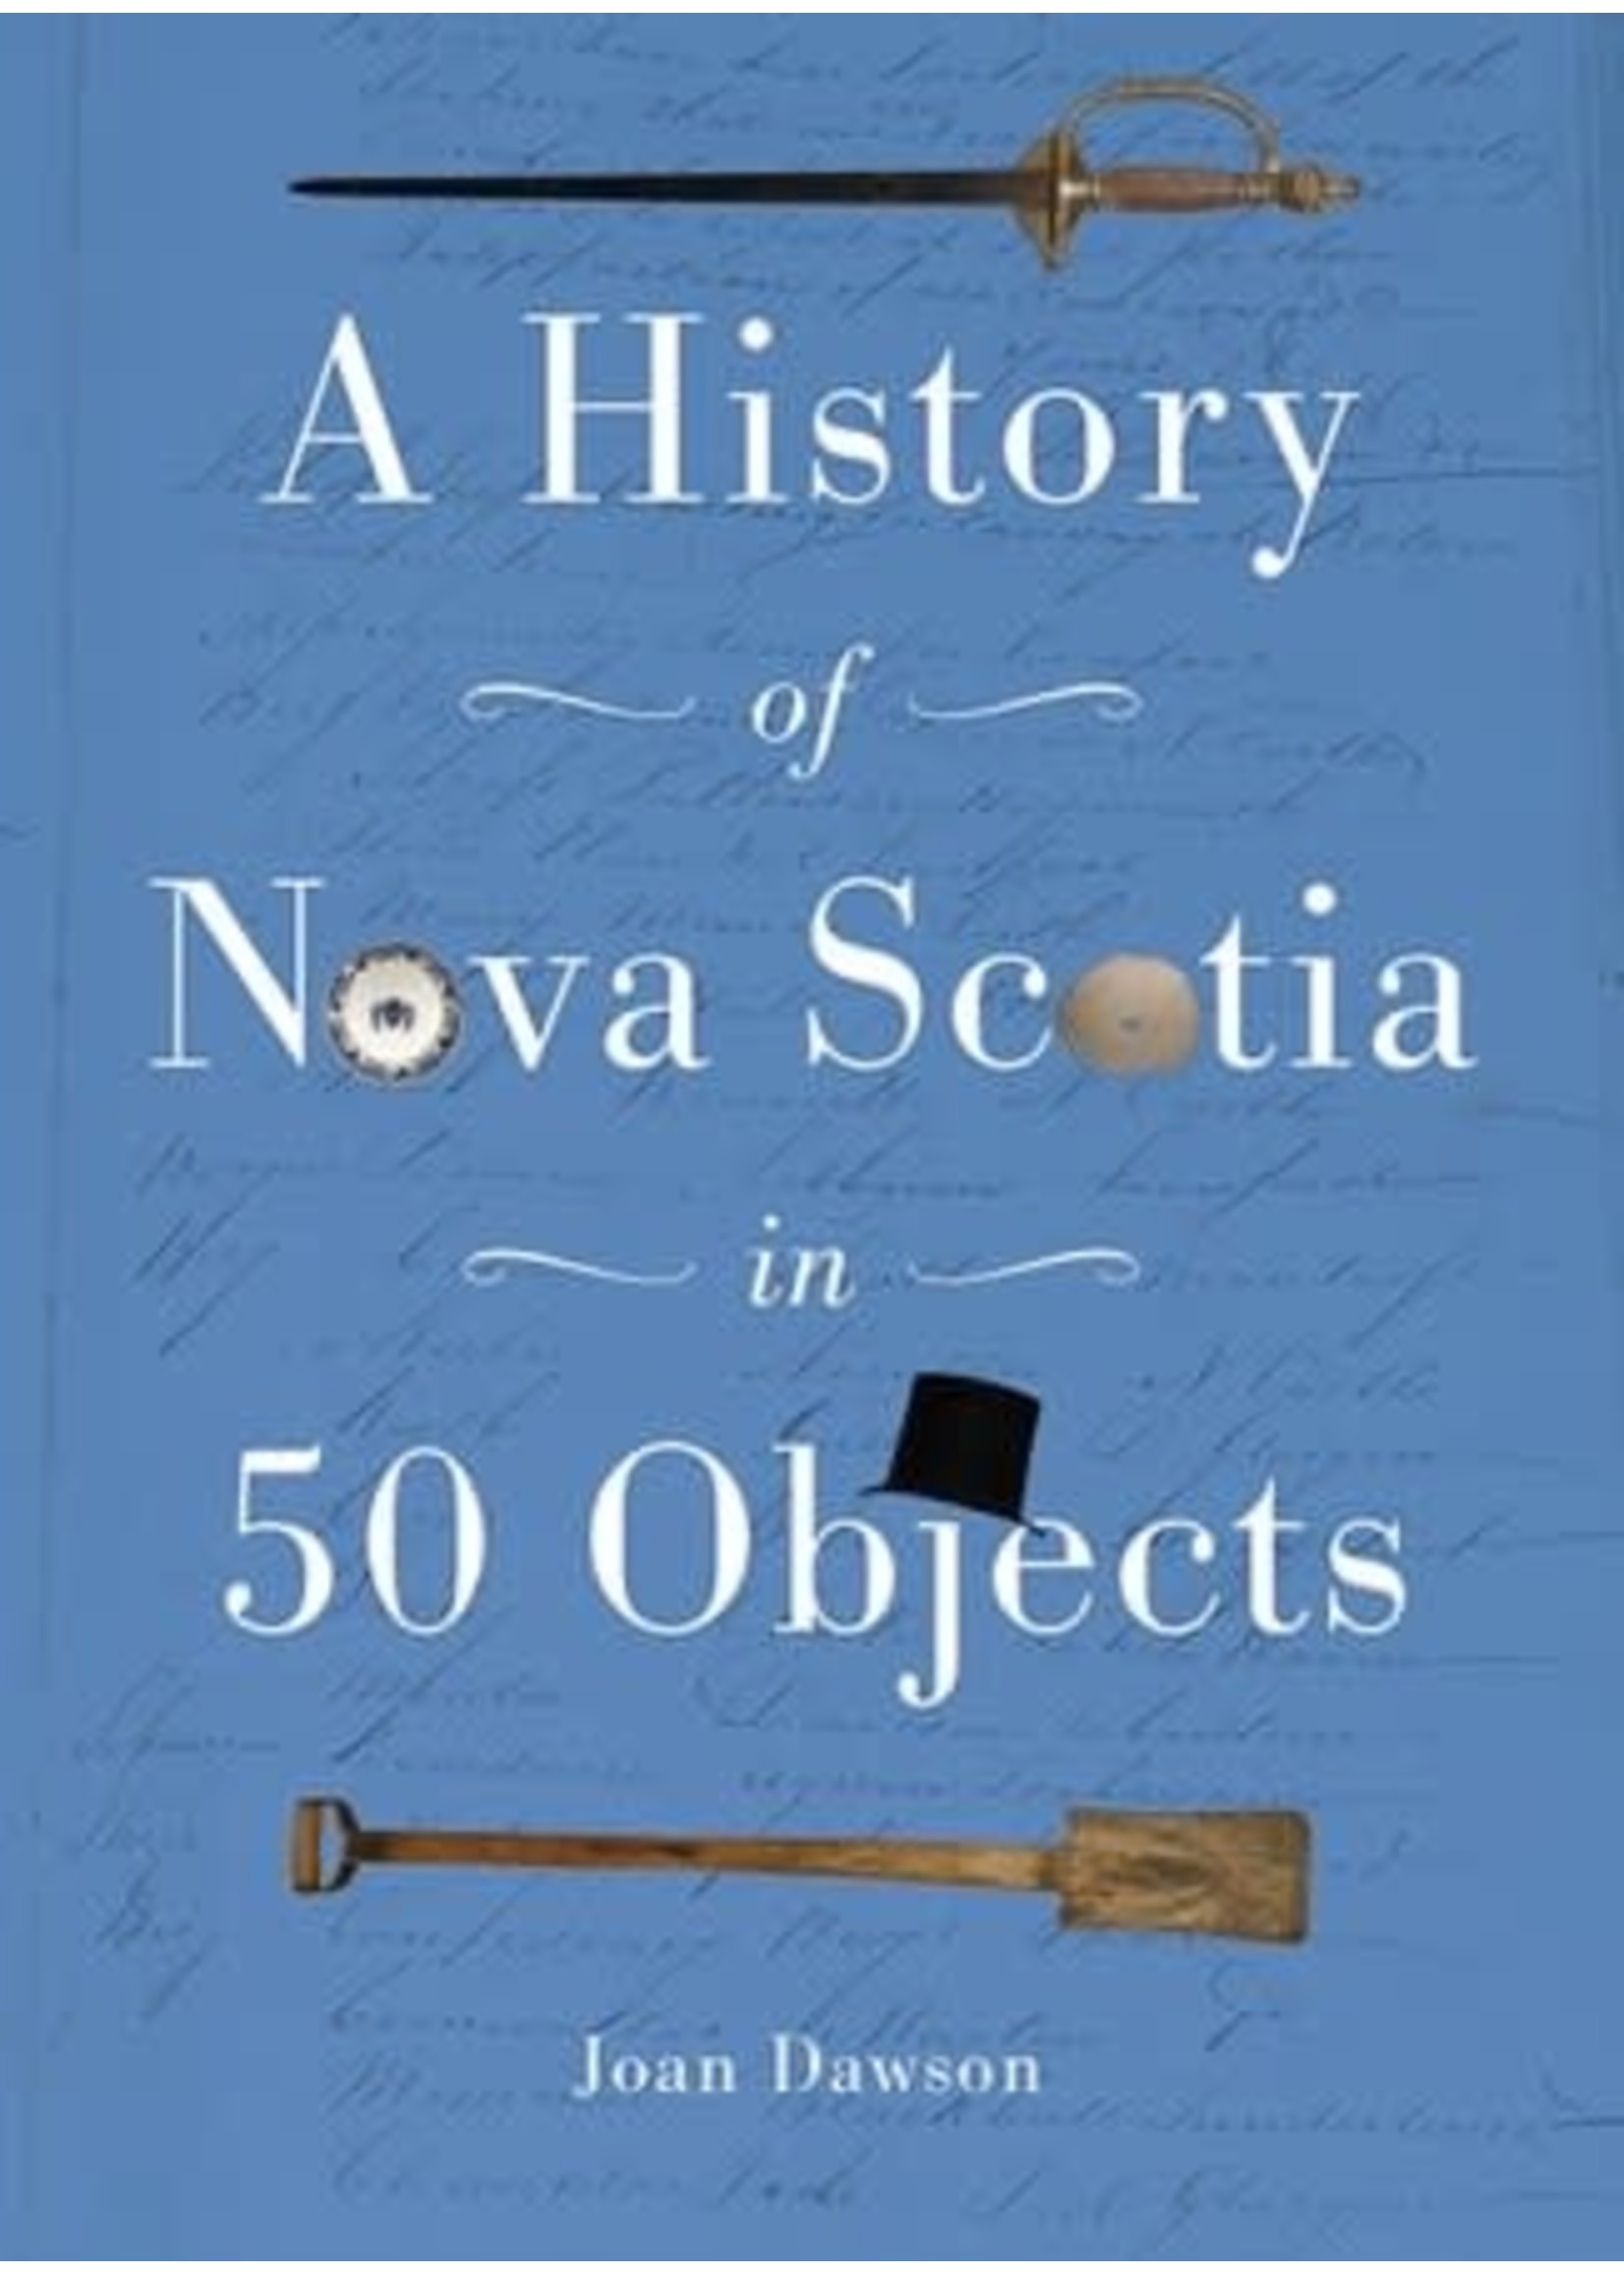 History of Nova Scotia in 50 Objects: History of Nova Scotia Through Museum Artifacts by Joan Dawson